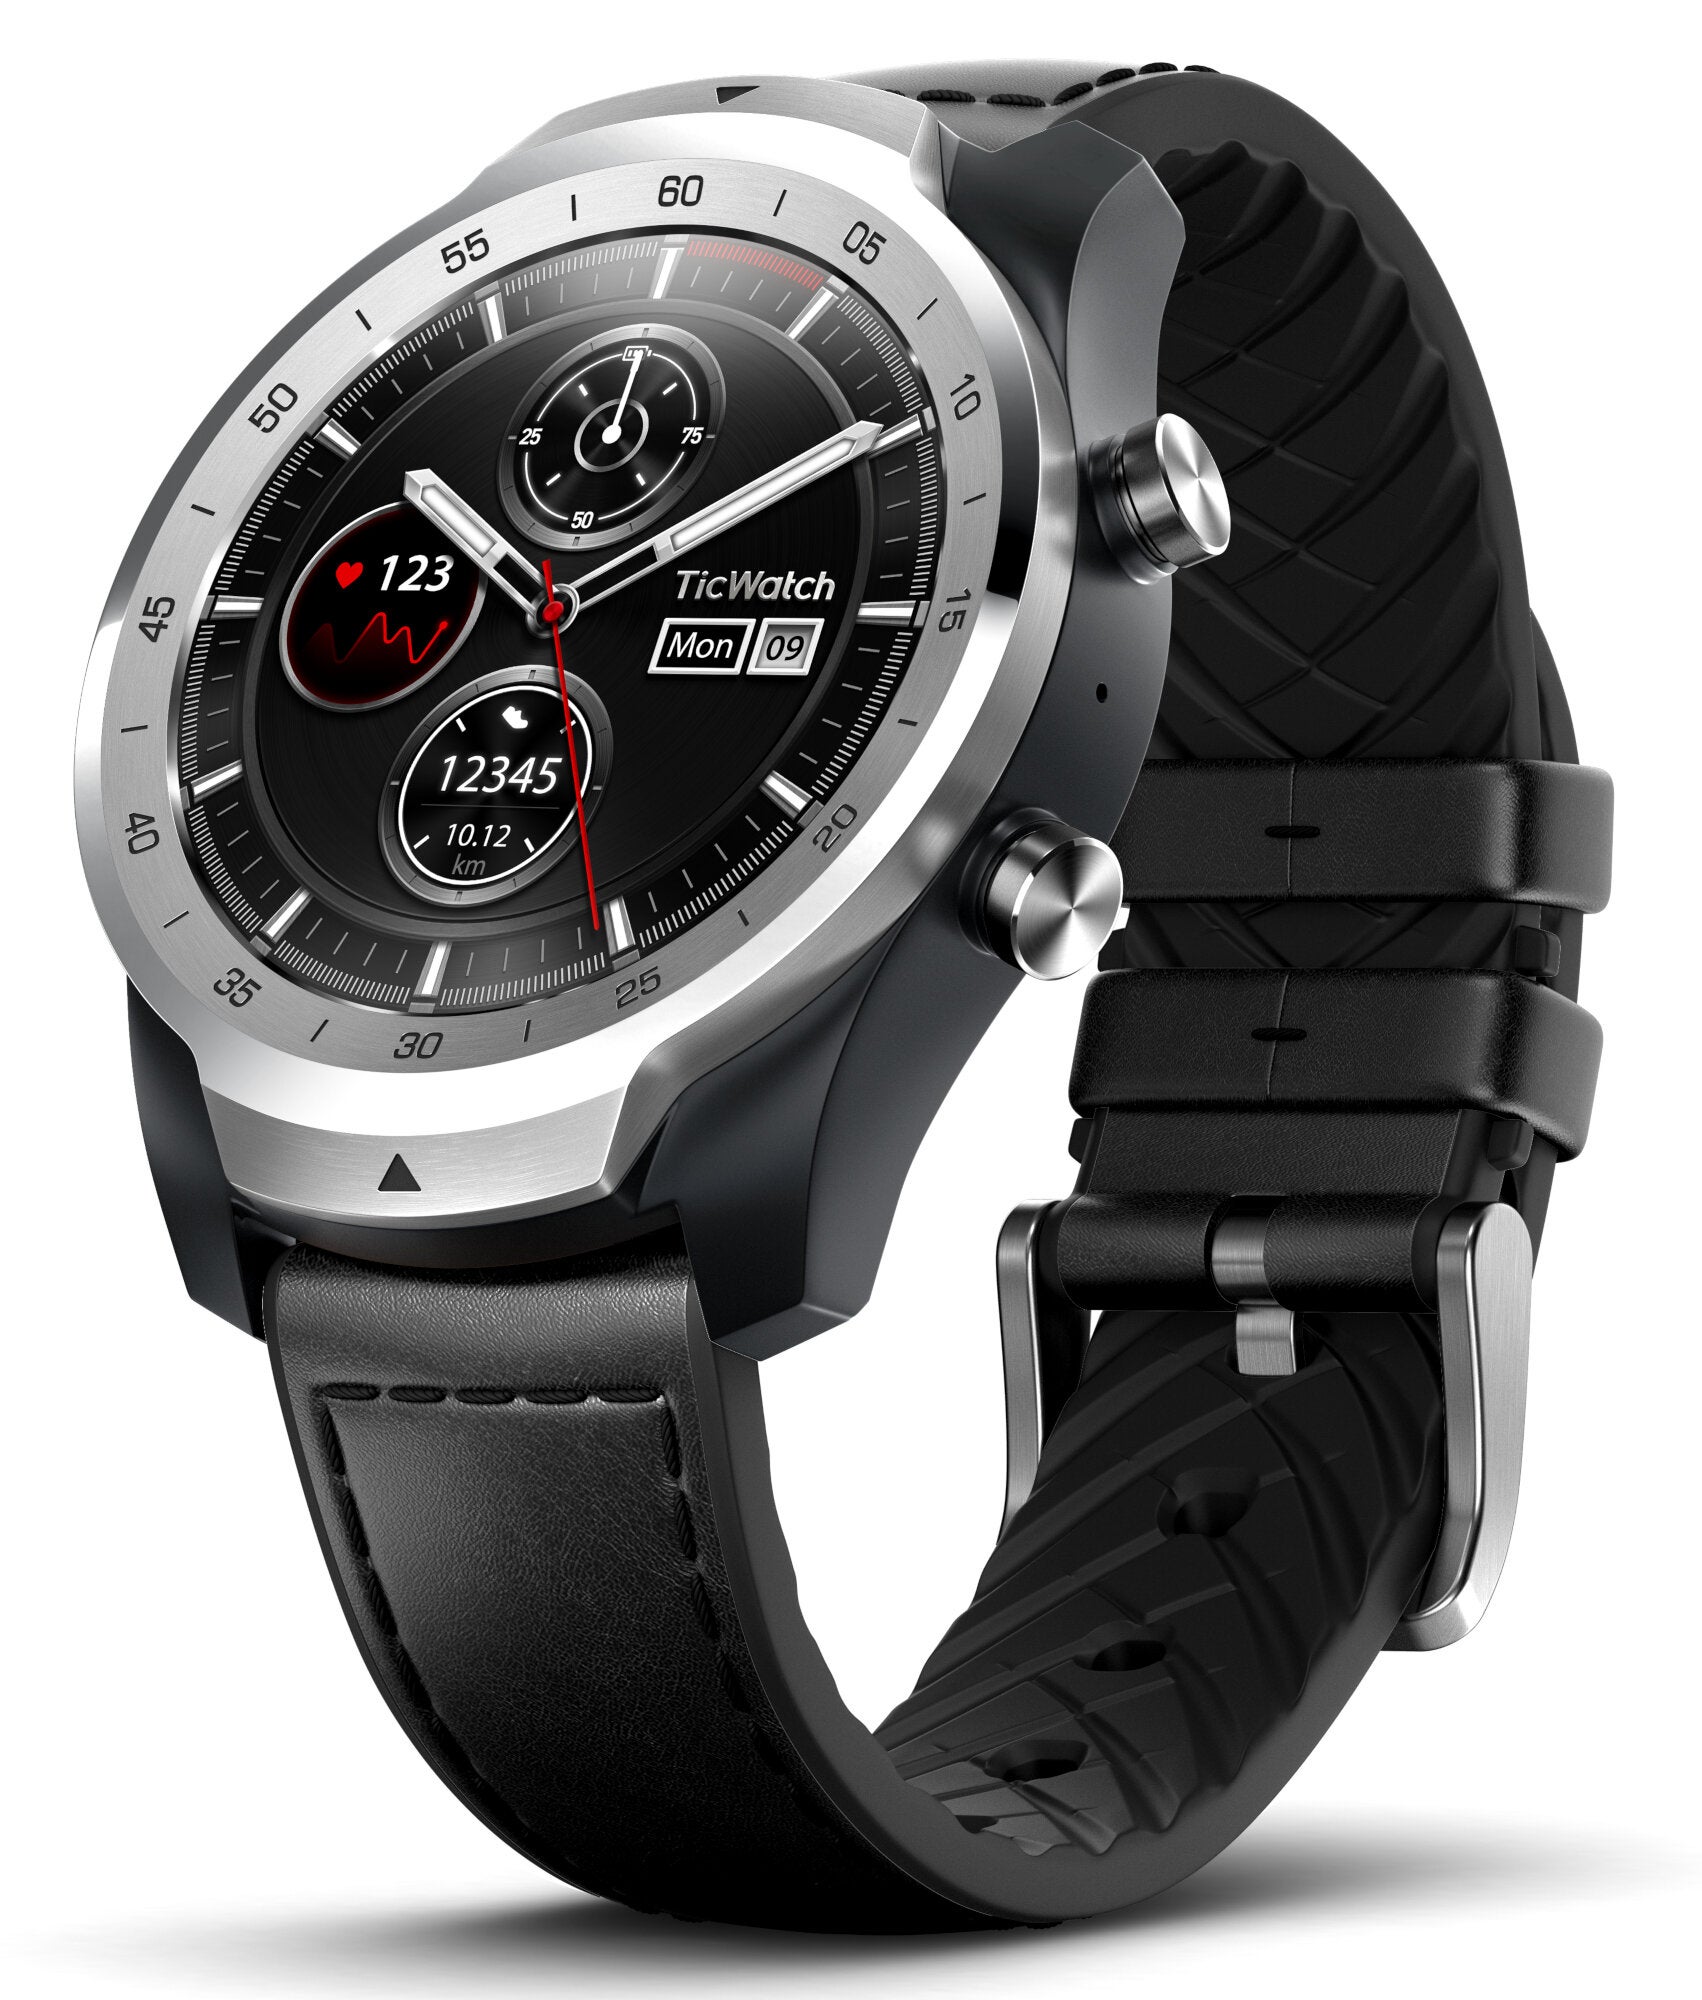 TicWatch Pro 2020 - The new TicWatch Pro 2020 smartwatch promises up to 30 days of battery life